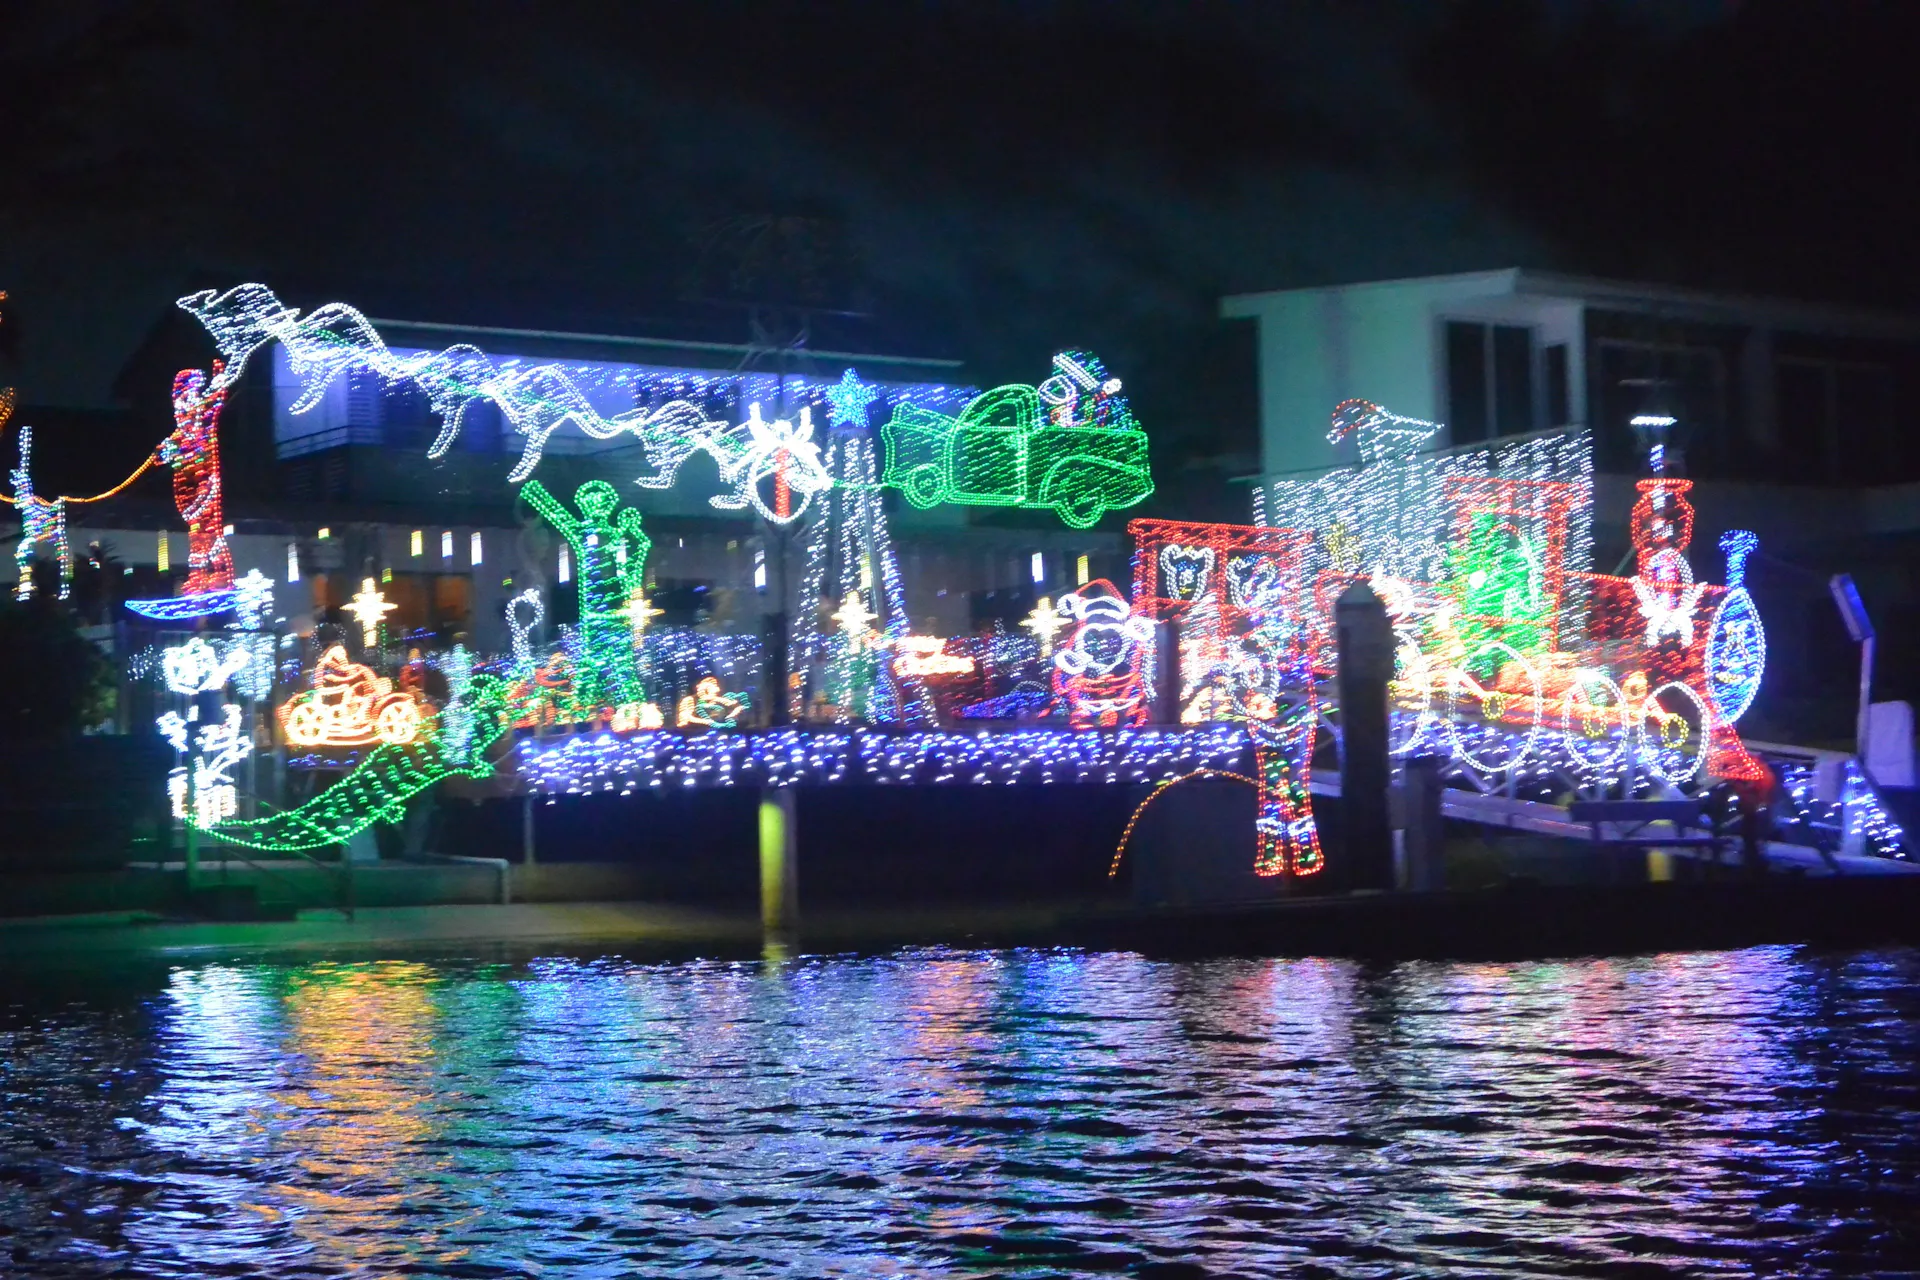 The absolute gem of the Mooloolaba Christmas Lights cruises.